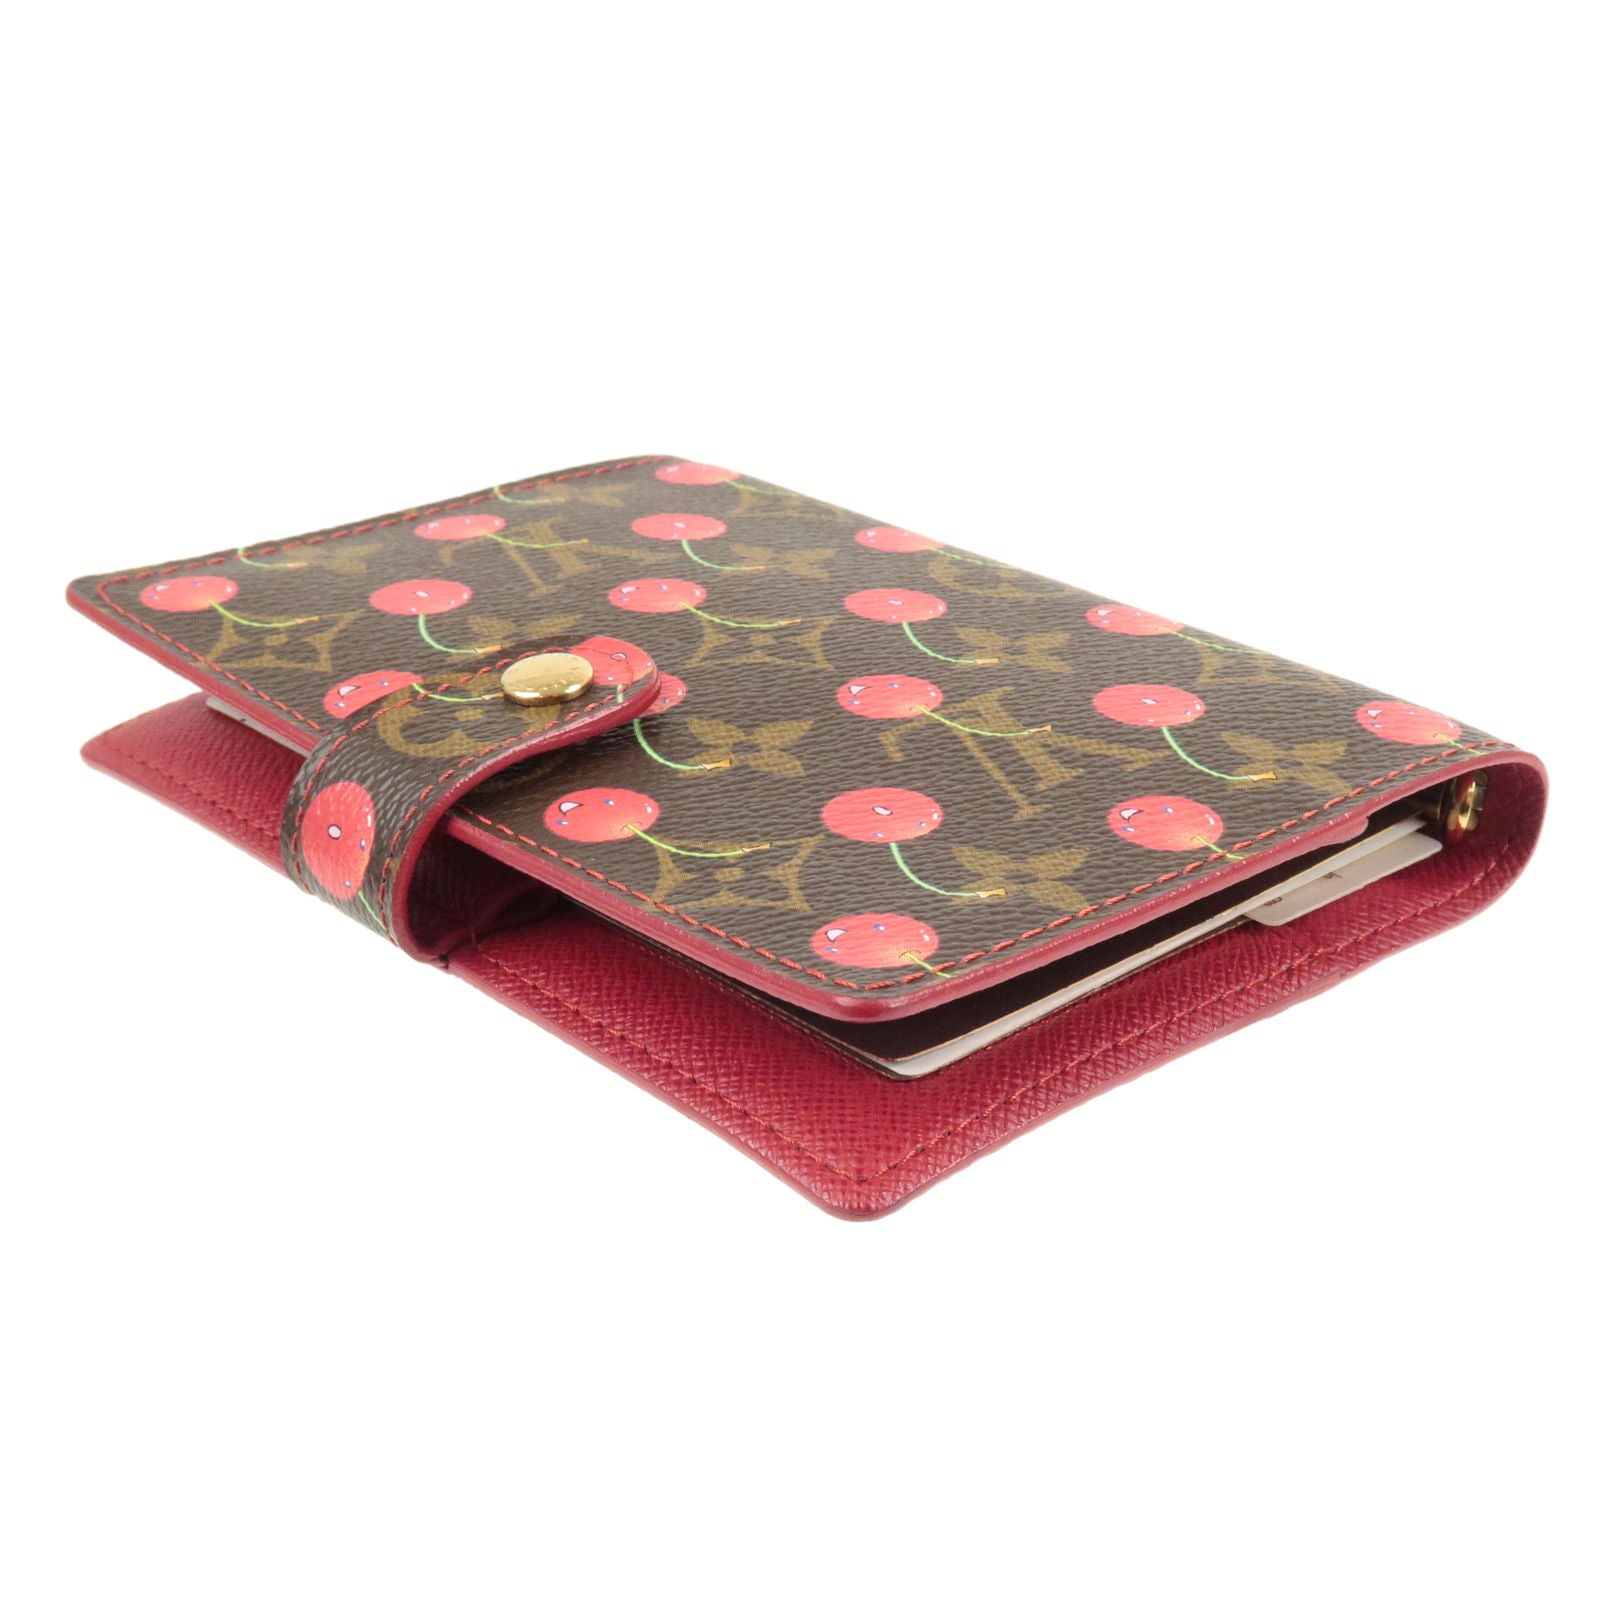 Authentic Louis Vuitton Red Patent Leather Agenda / Notebook Binder / Cover